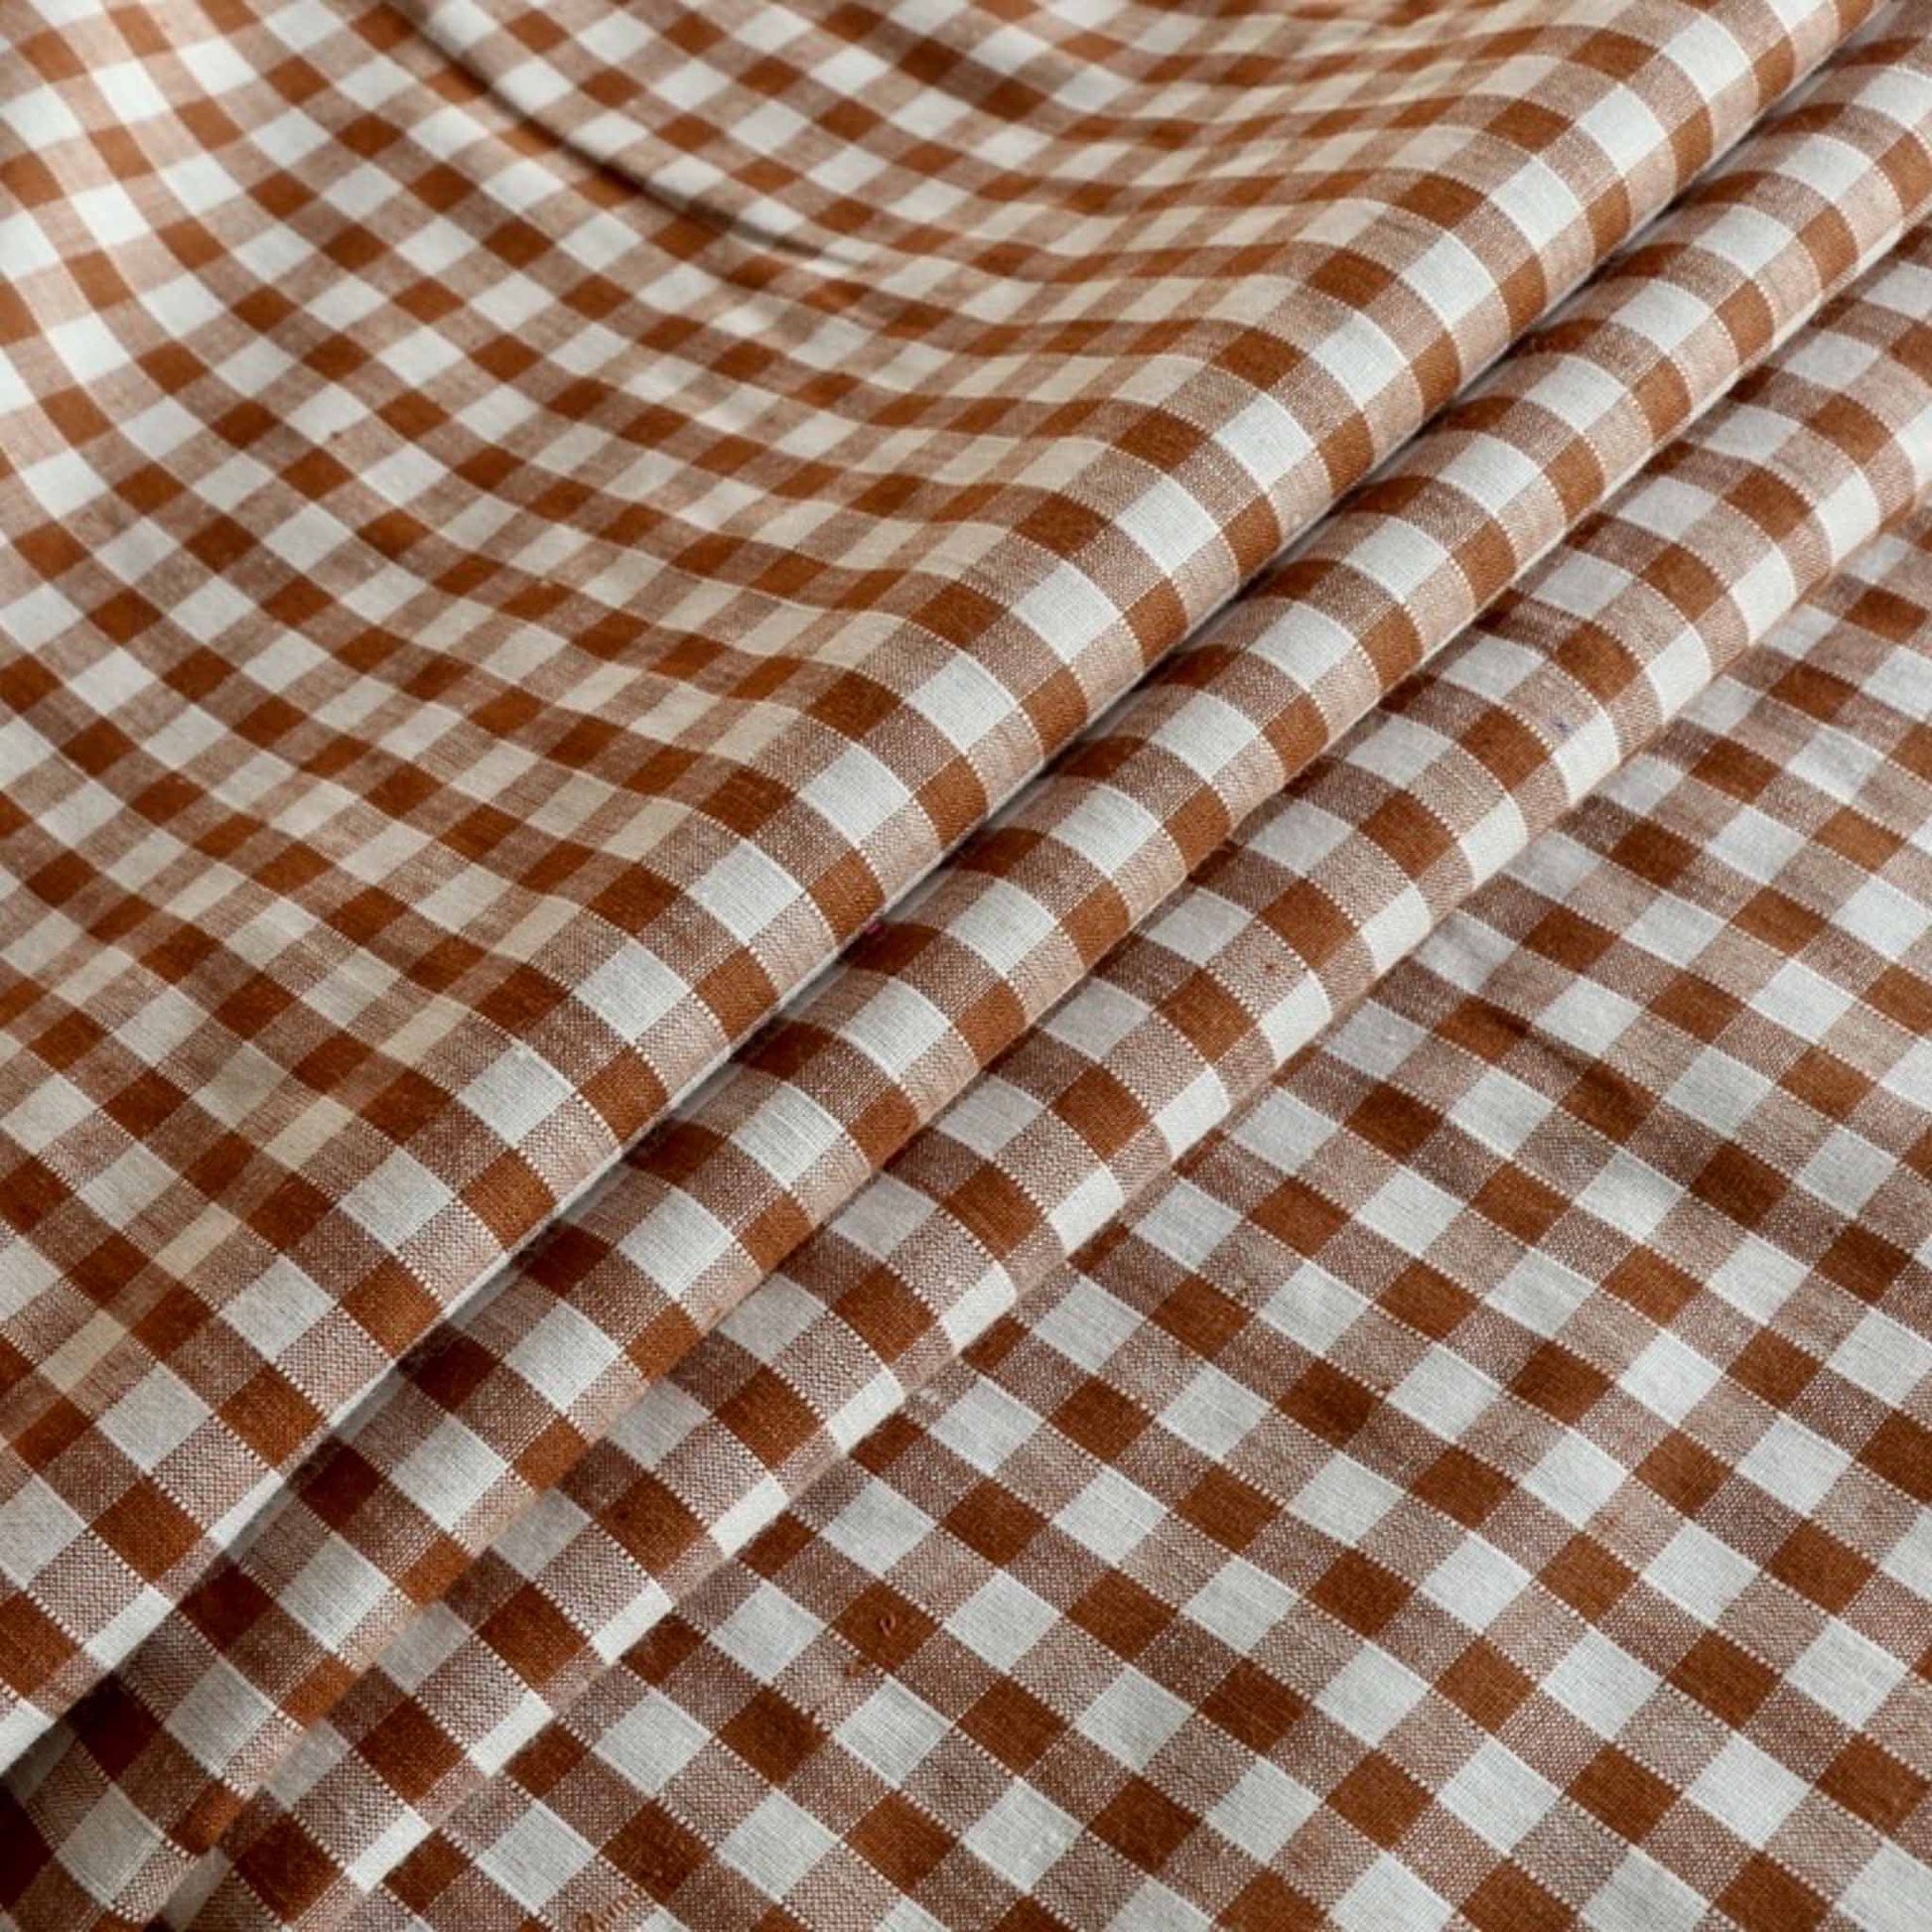 retro vintage sustainable cotton dressmaking fabric with classic gingham pattern in brown and beige